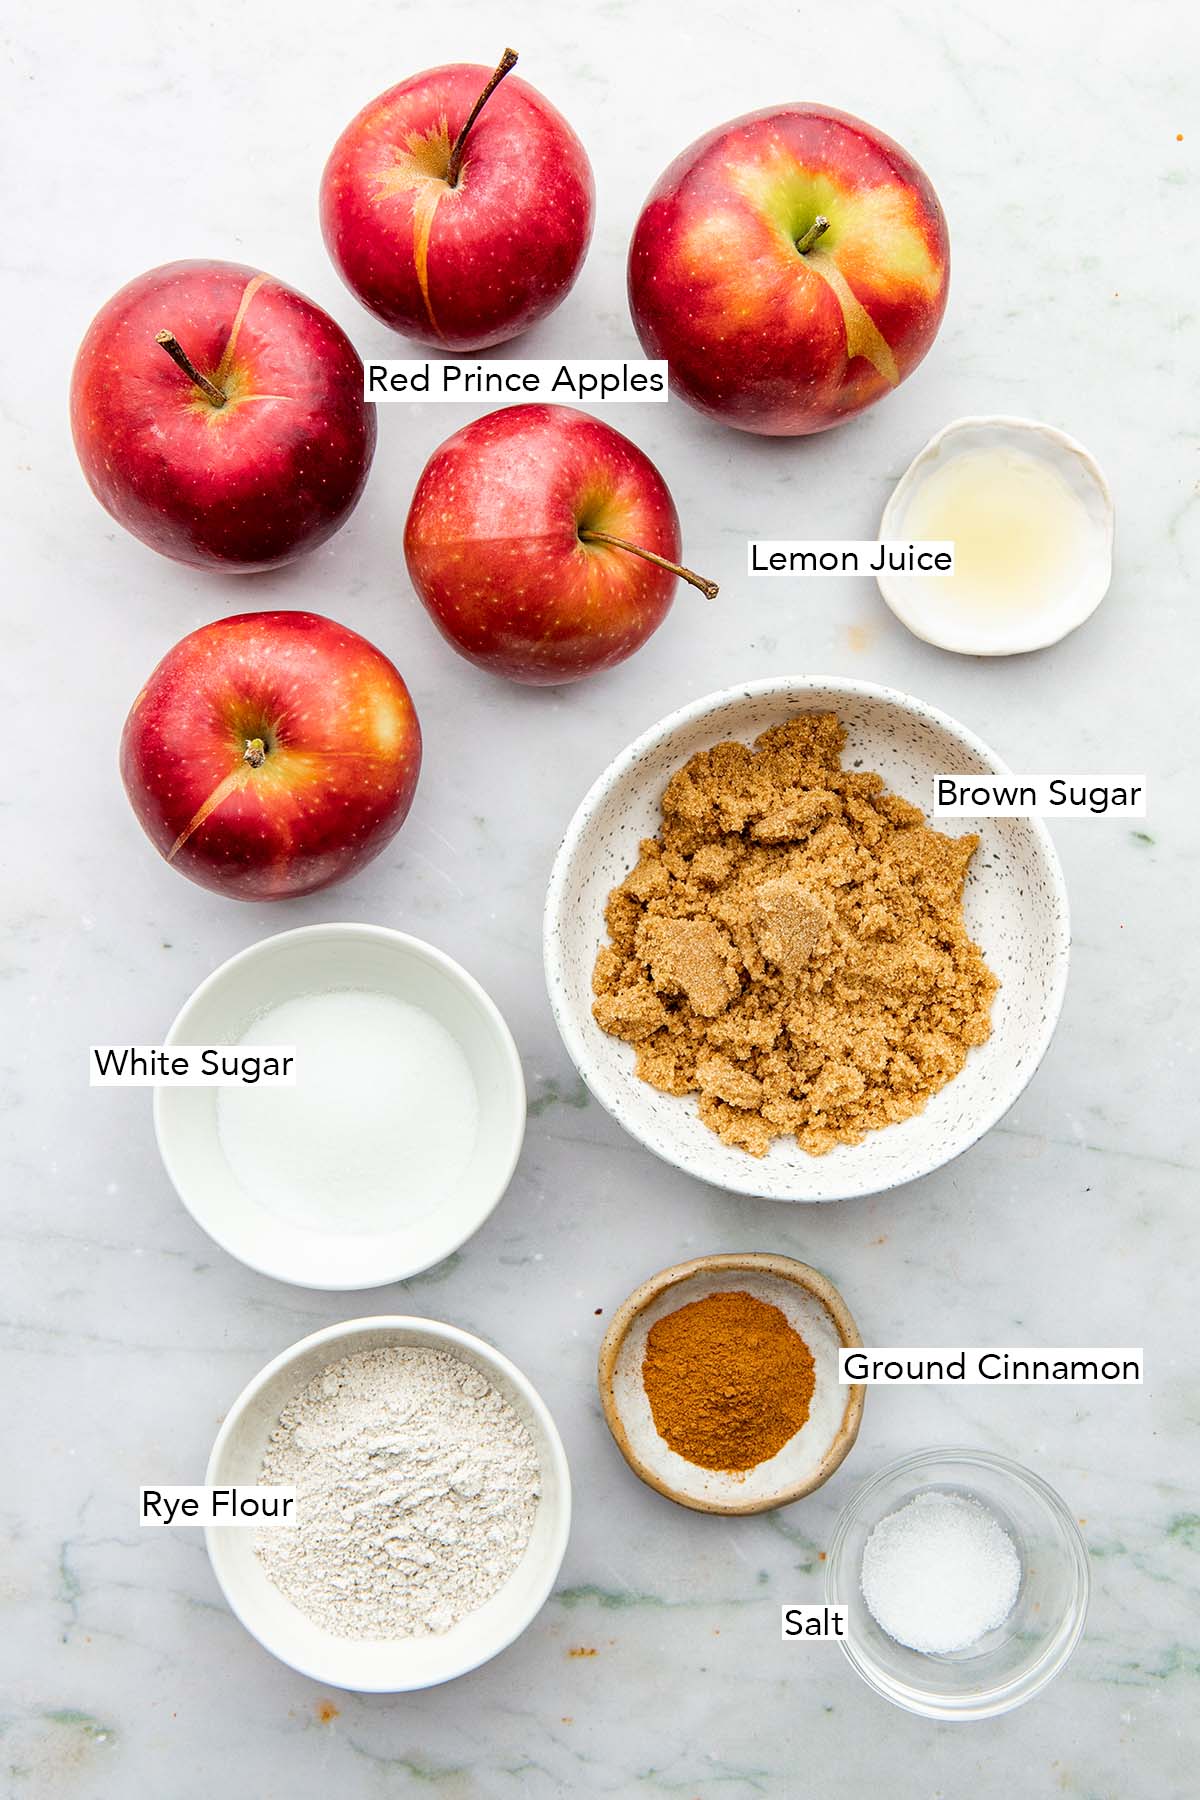 Ingredients to make the apple filling for this recipe.